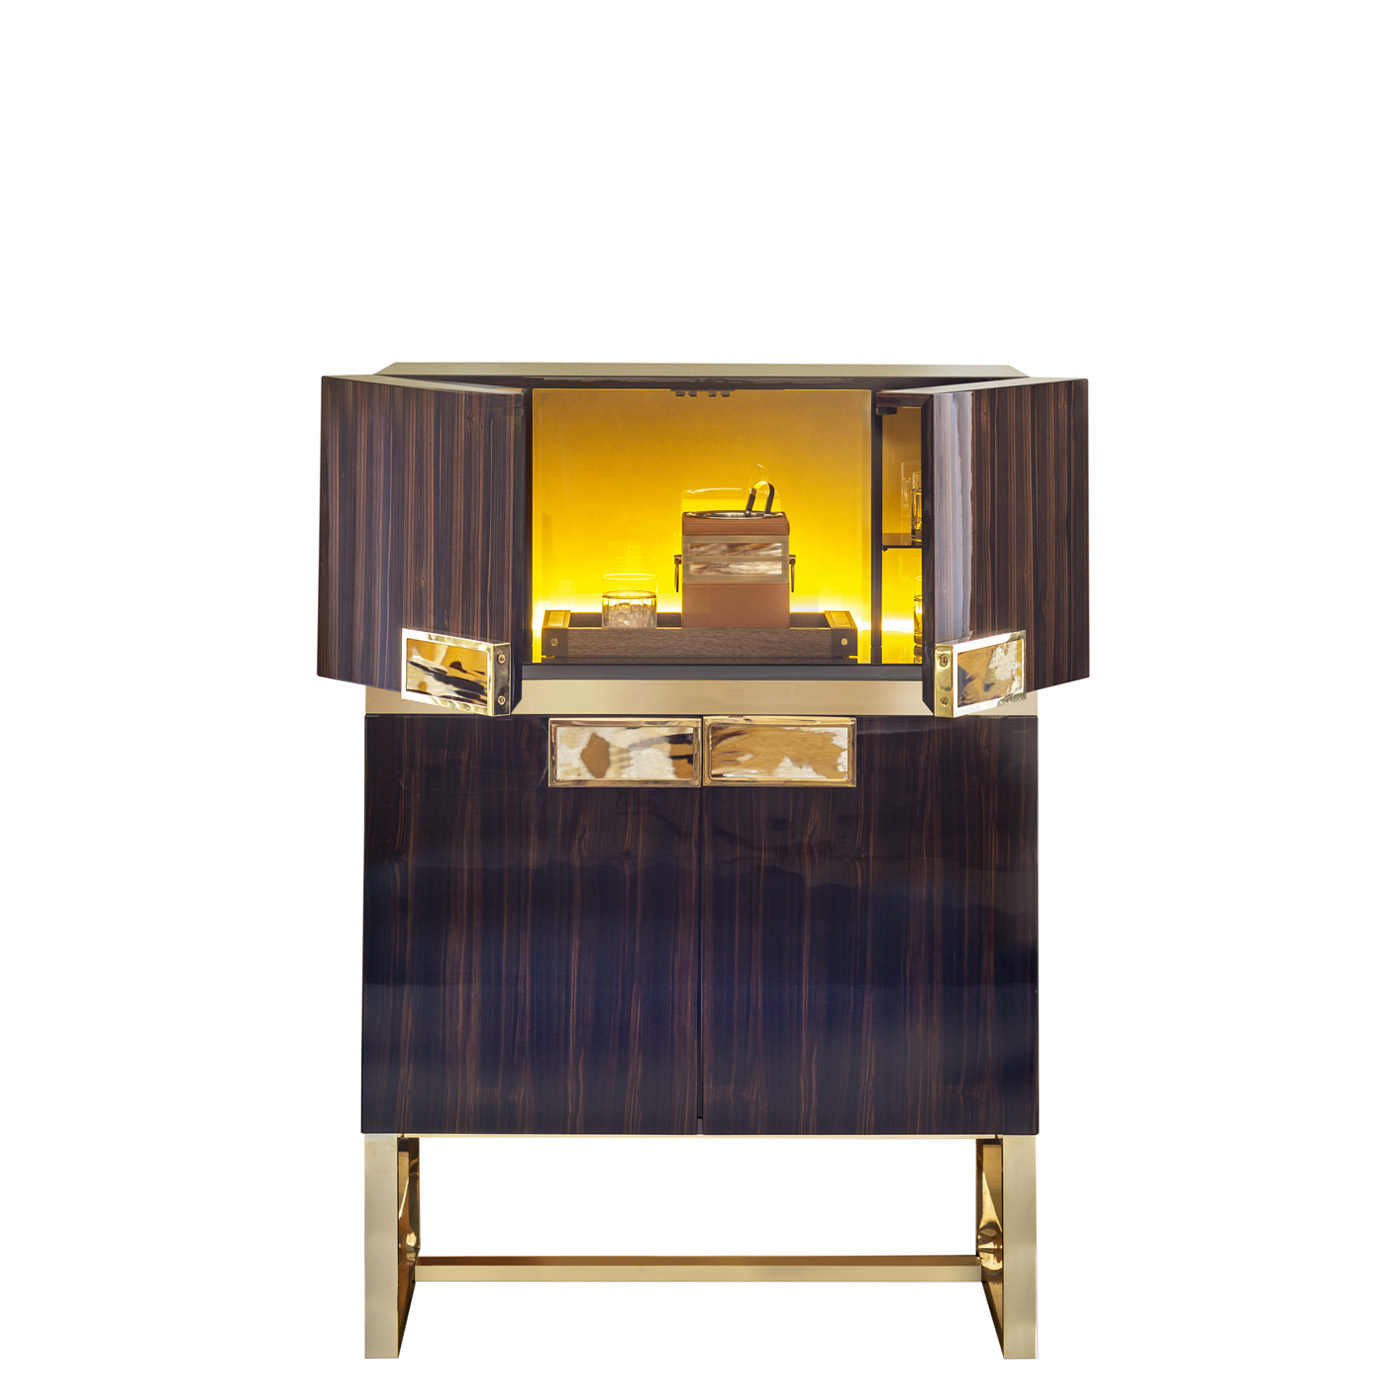 Cabinets and bookcases - Cosmopolitan bar cabinet in glossy Makassar ebony wood and 24k gold brass plated brass - Arcahorn